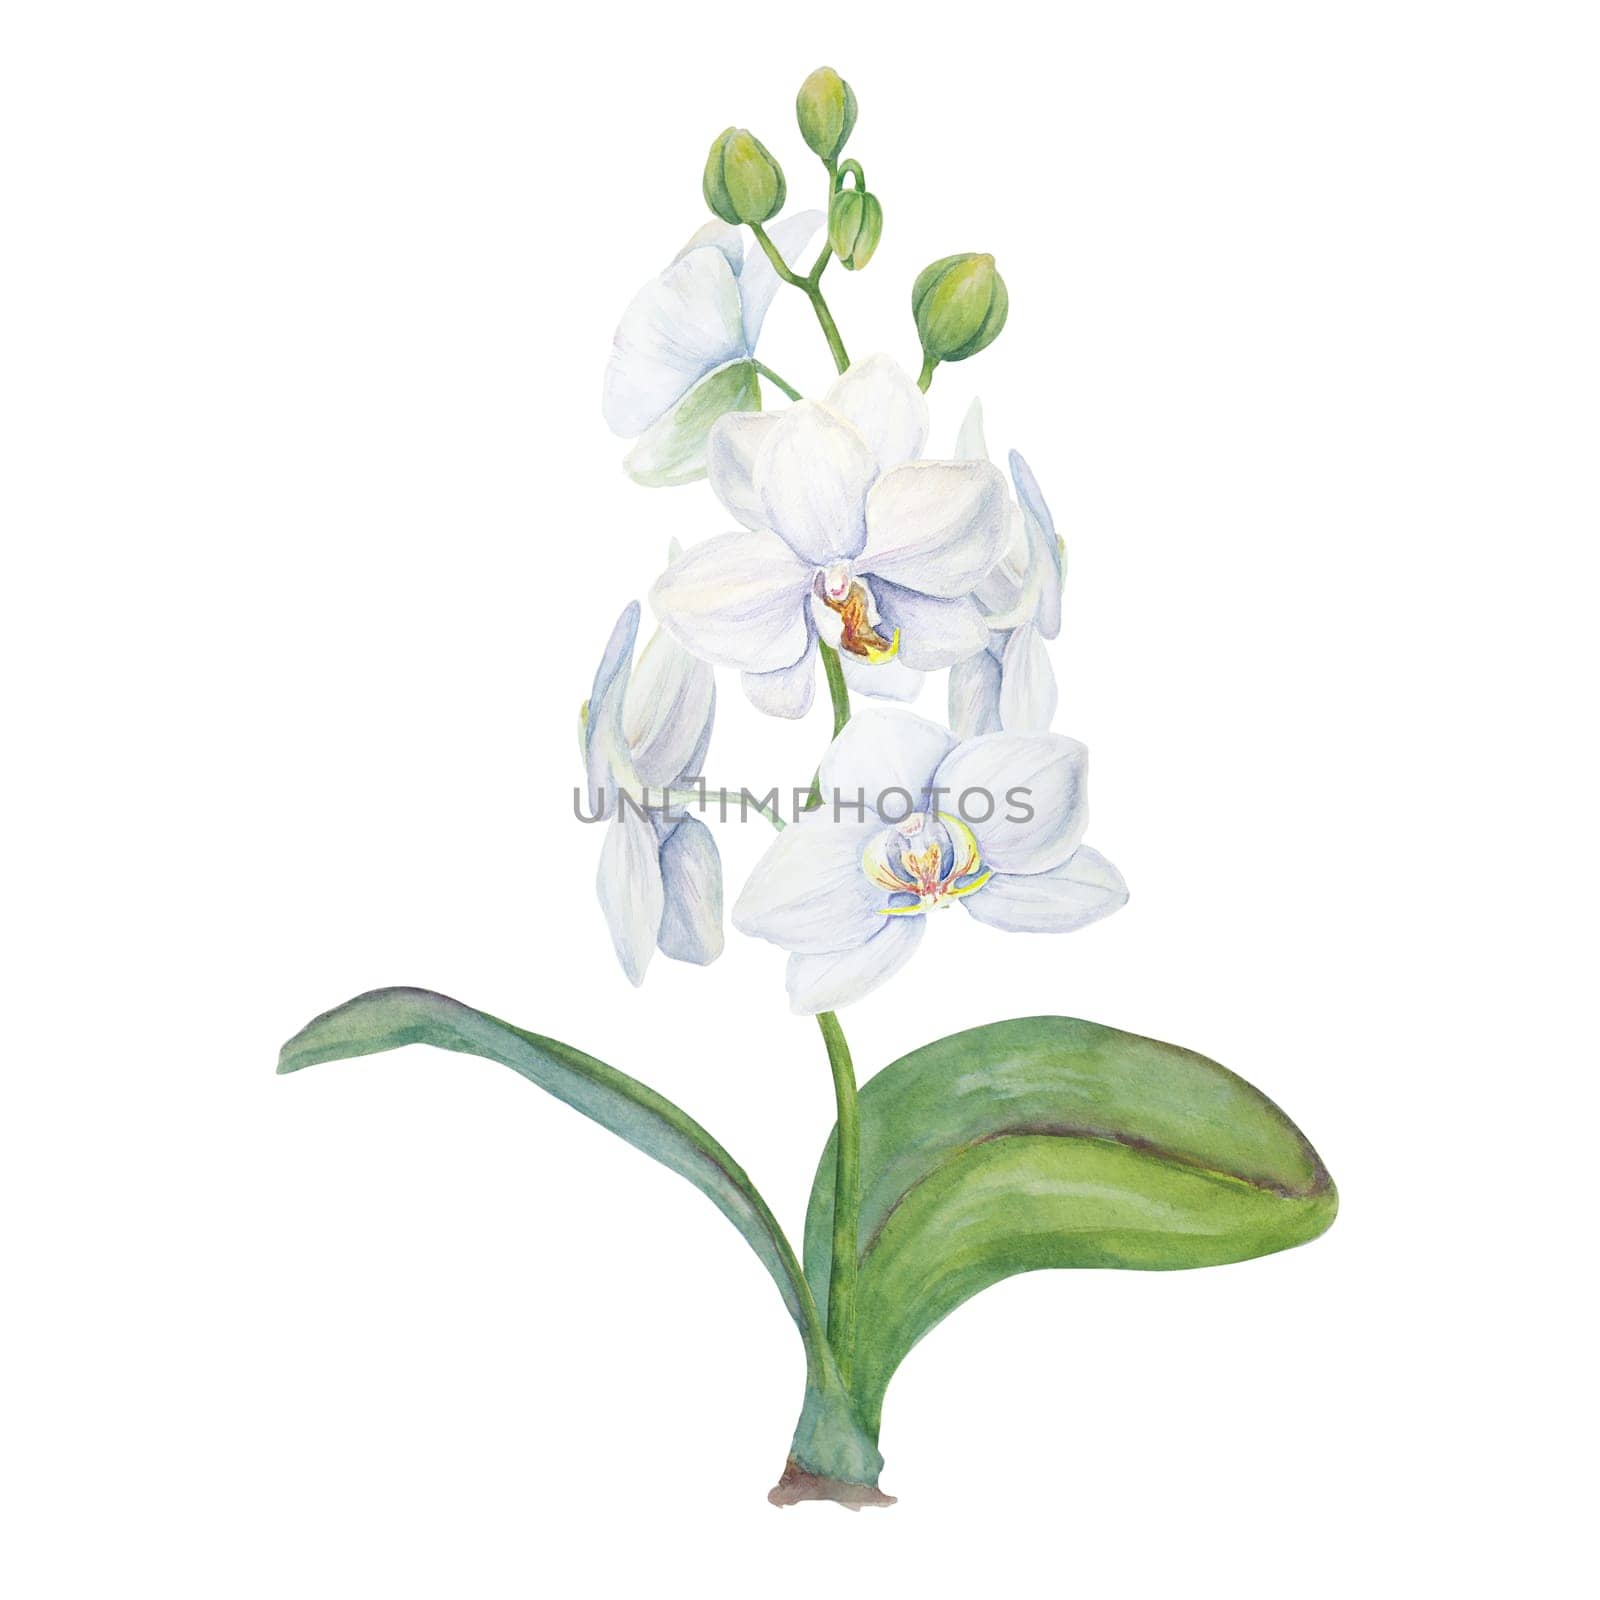 White orchid flower with leaves. Delicate realistic botanical watercolor hand drawn illustration. Clip art for wedding invitations, decor, textiles, gifts, packaging, floristry, flower farming, shops by florainlove_art